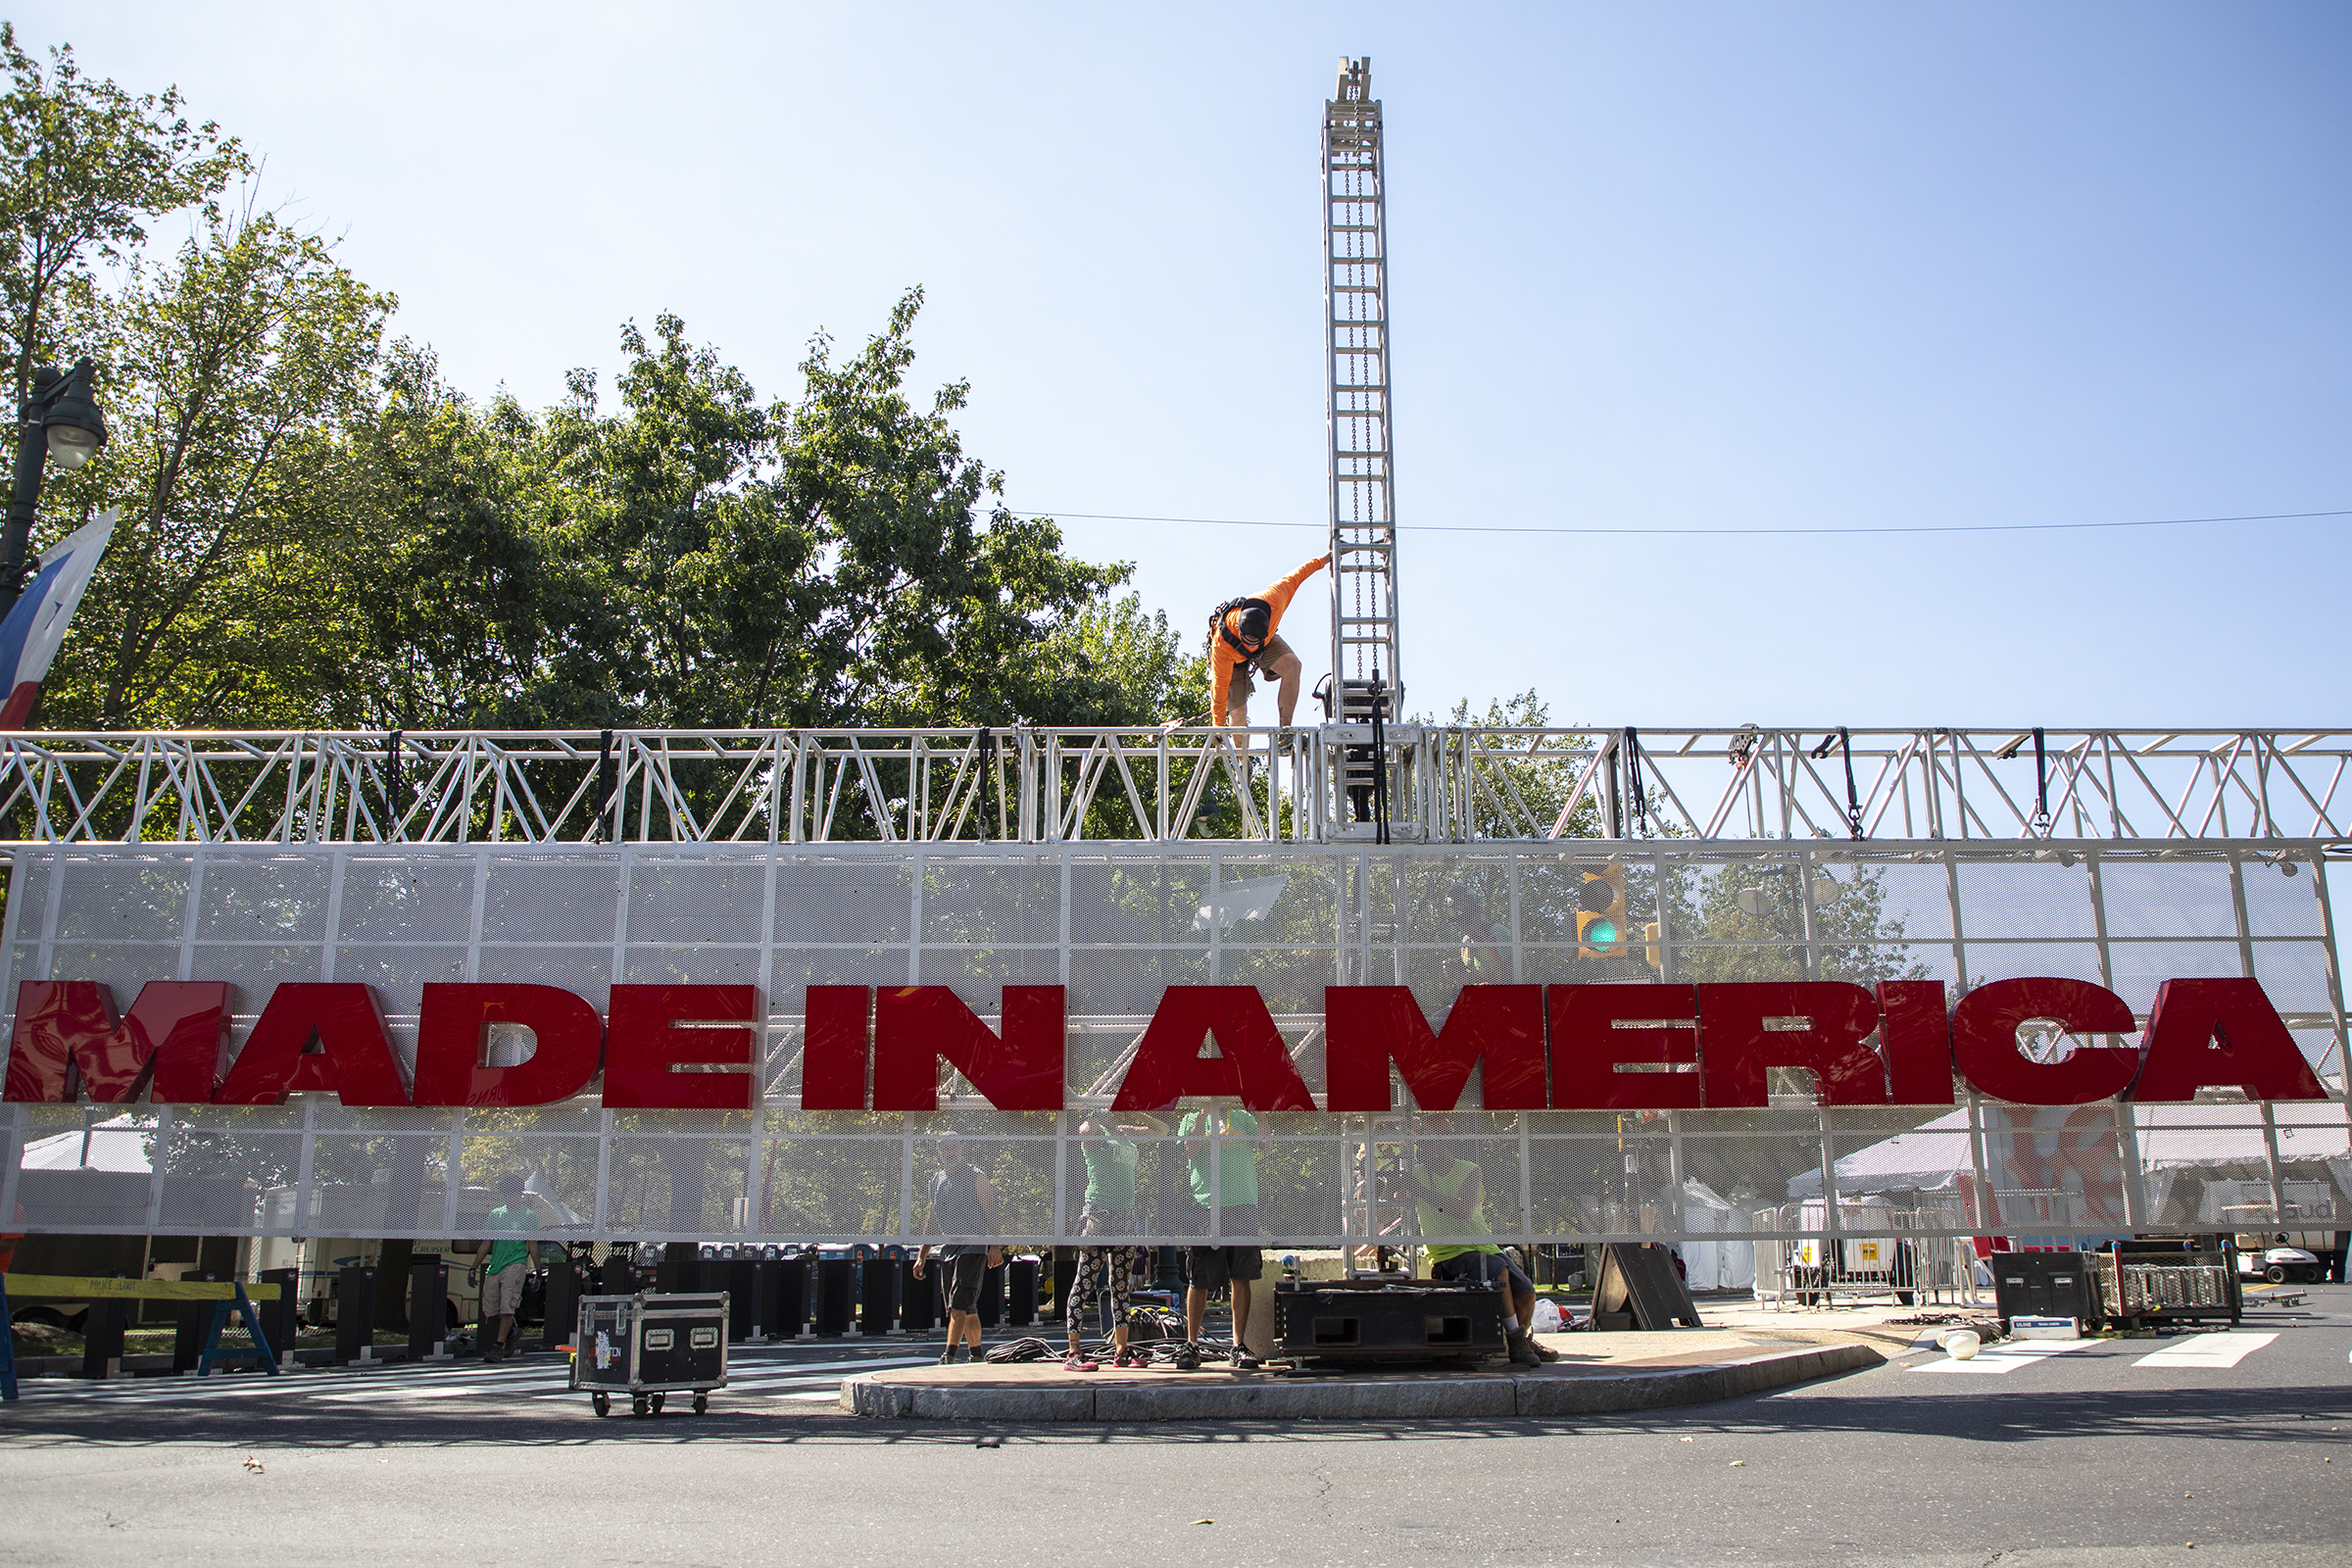 A Guide to Philly's Made in America Music Festival